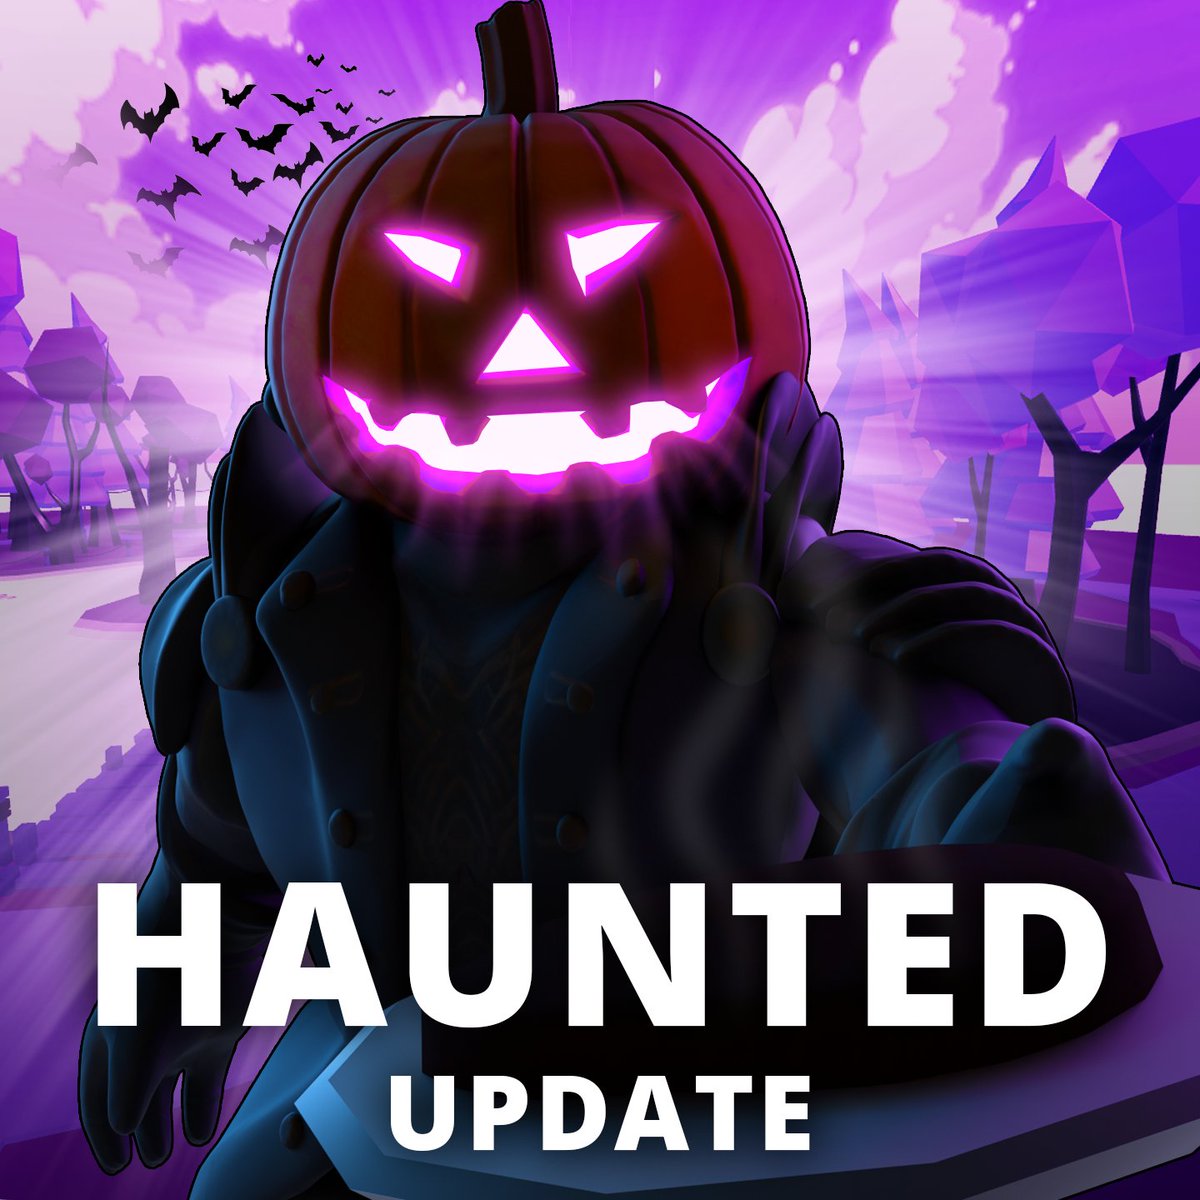 Big Games On Twitter My Restaurant Haunted Update Is Live For All Players Talk To The Headless Horseman At The Graveyard To Complete Tasks And Earn Limited Halloween Items More - how to get all halloween items in roblox